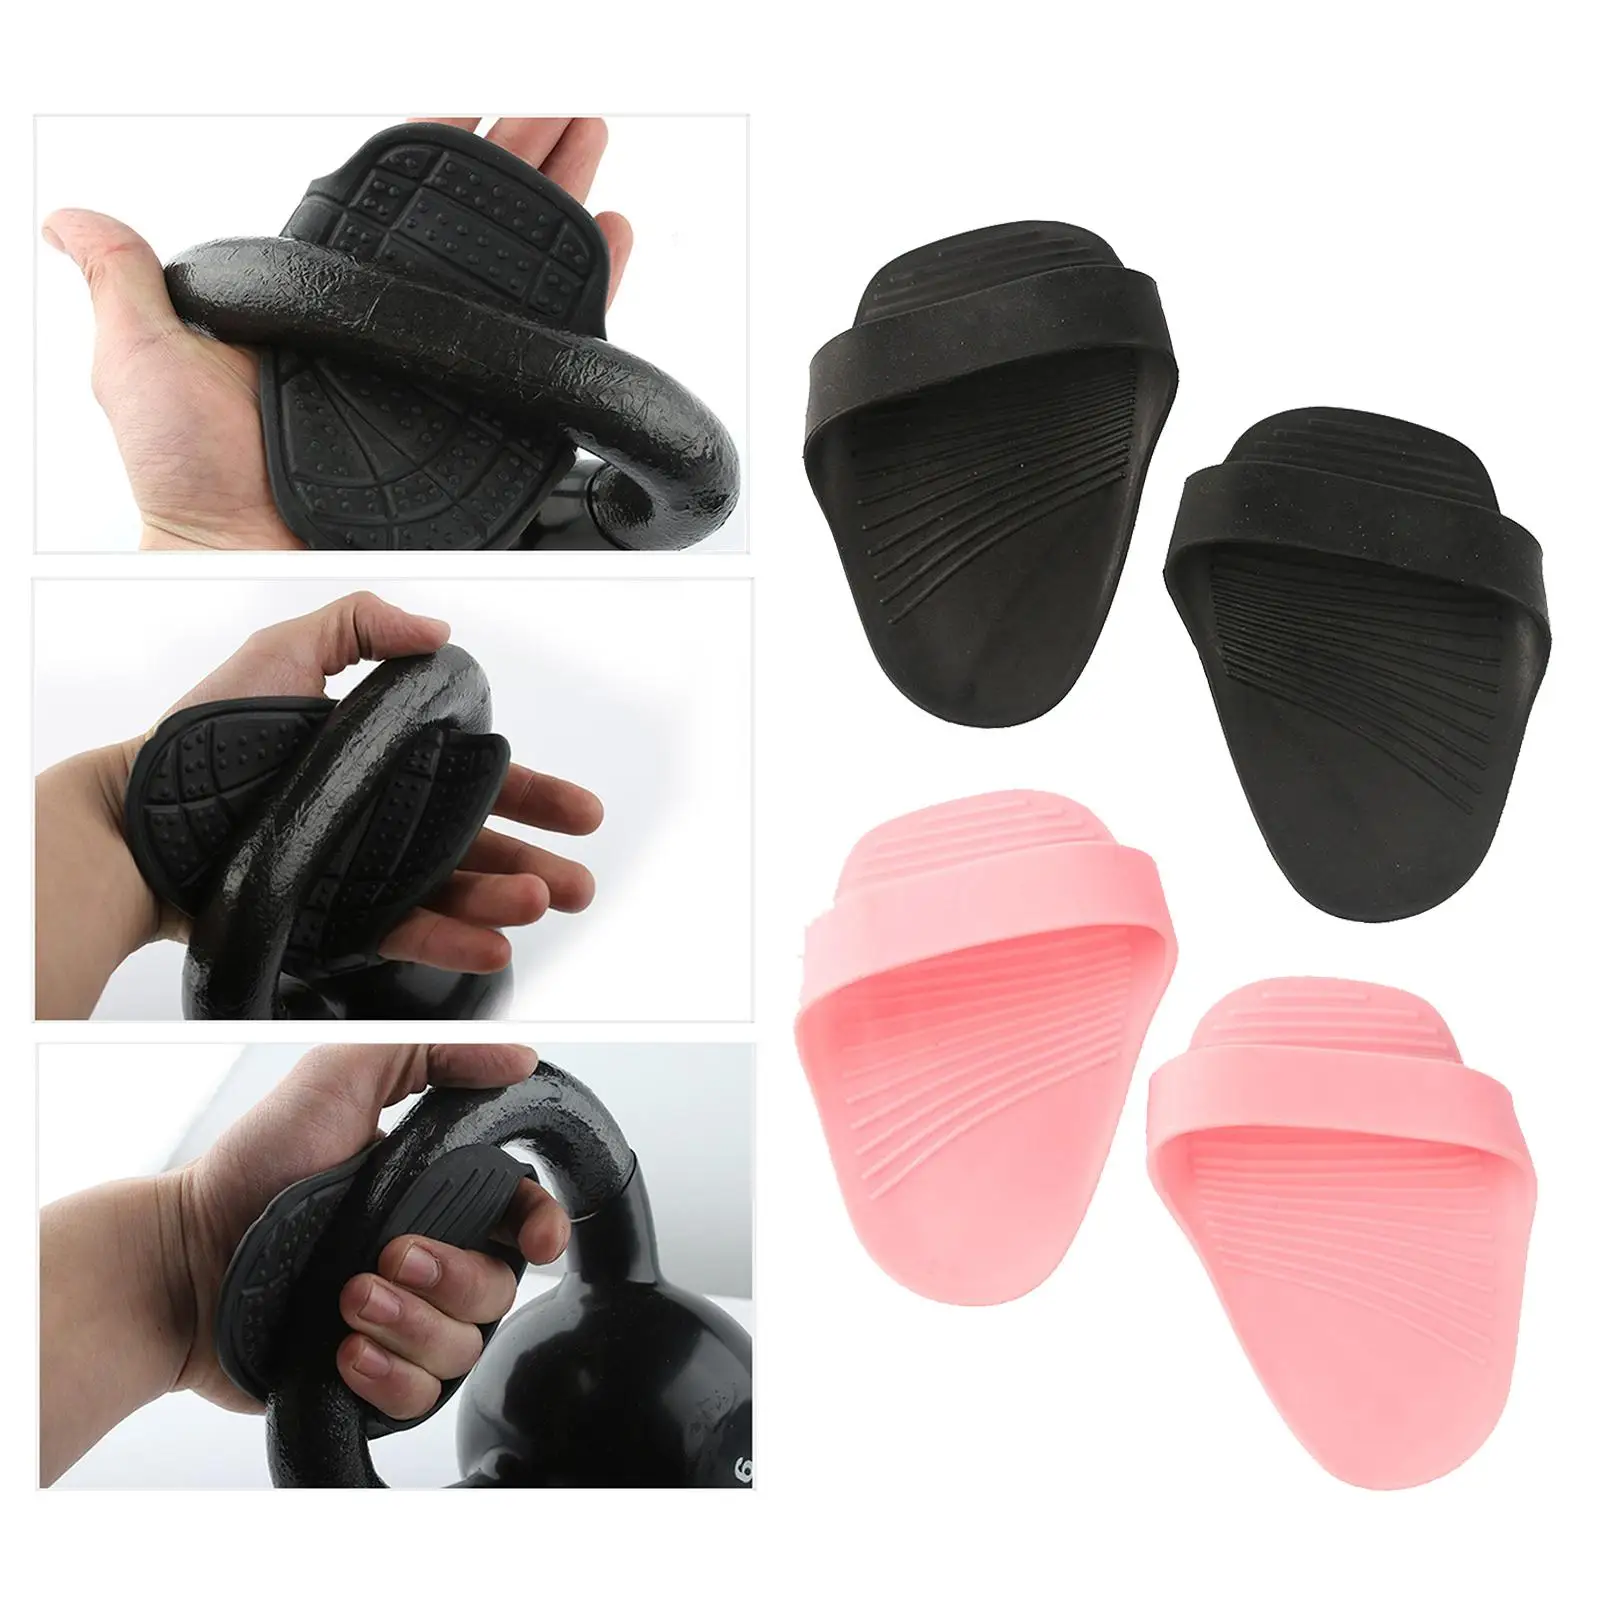 Lifting Grip Pads Hand Palm Protector for Men Women Powerlifting Anti Skid